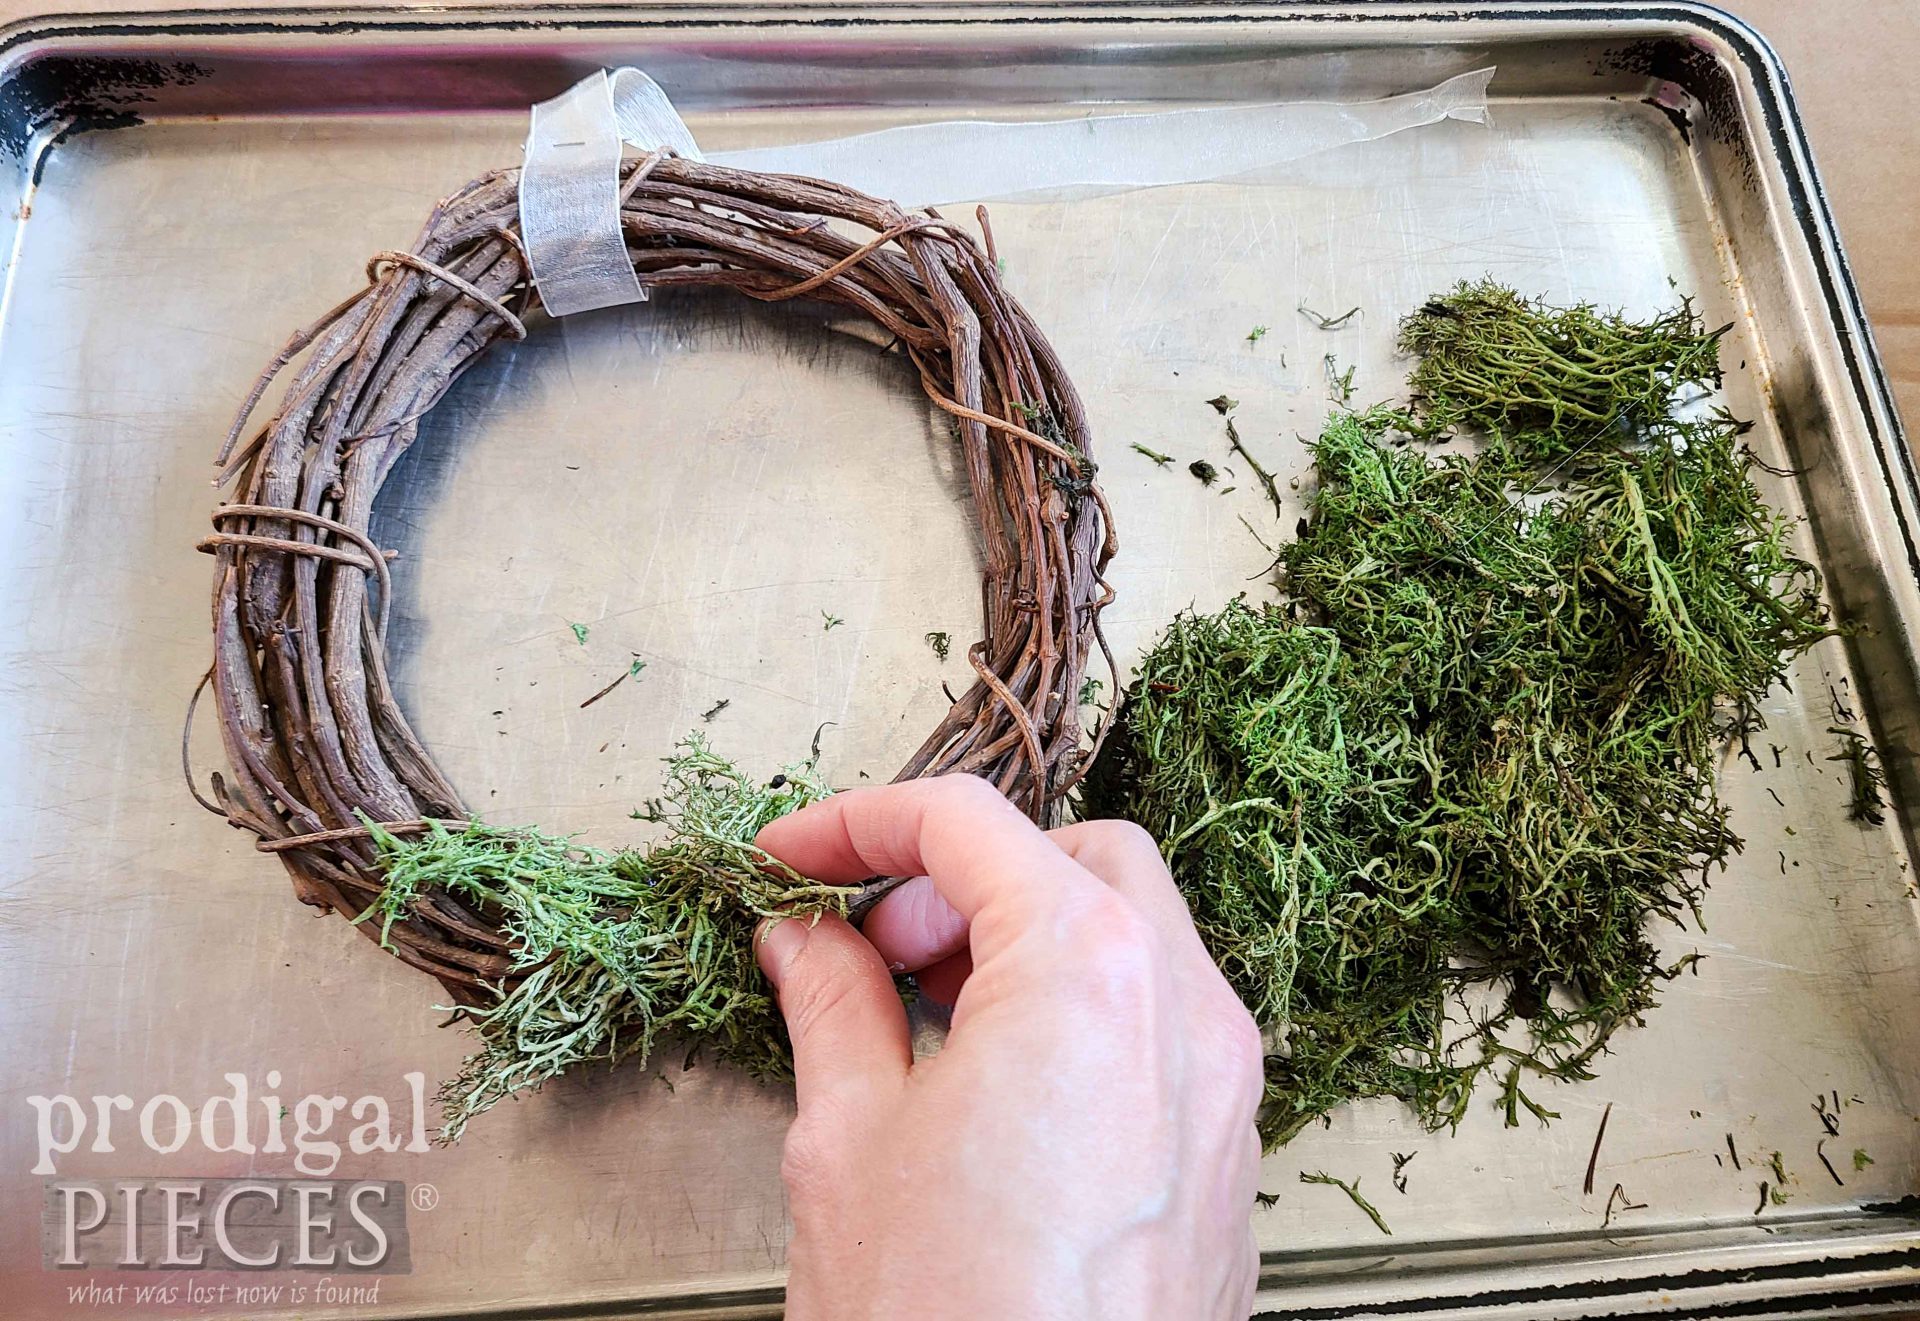 Making Reindeer Moss Grapevine Wreath for Upcycled Ornate Frame | prodigalpieces.com